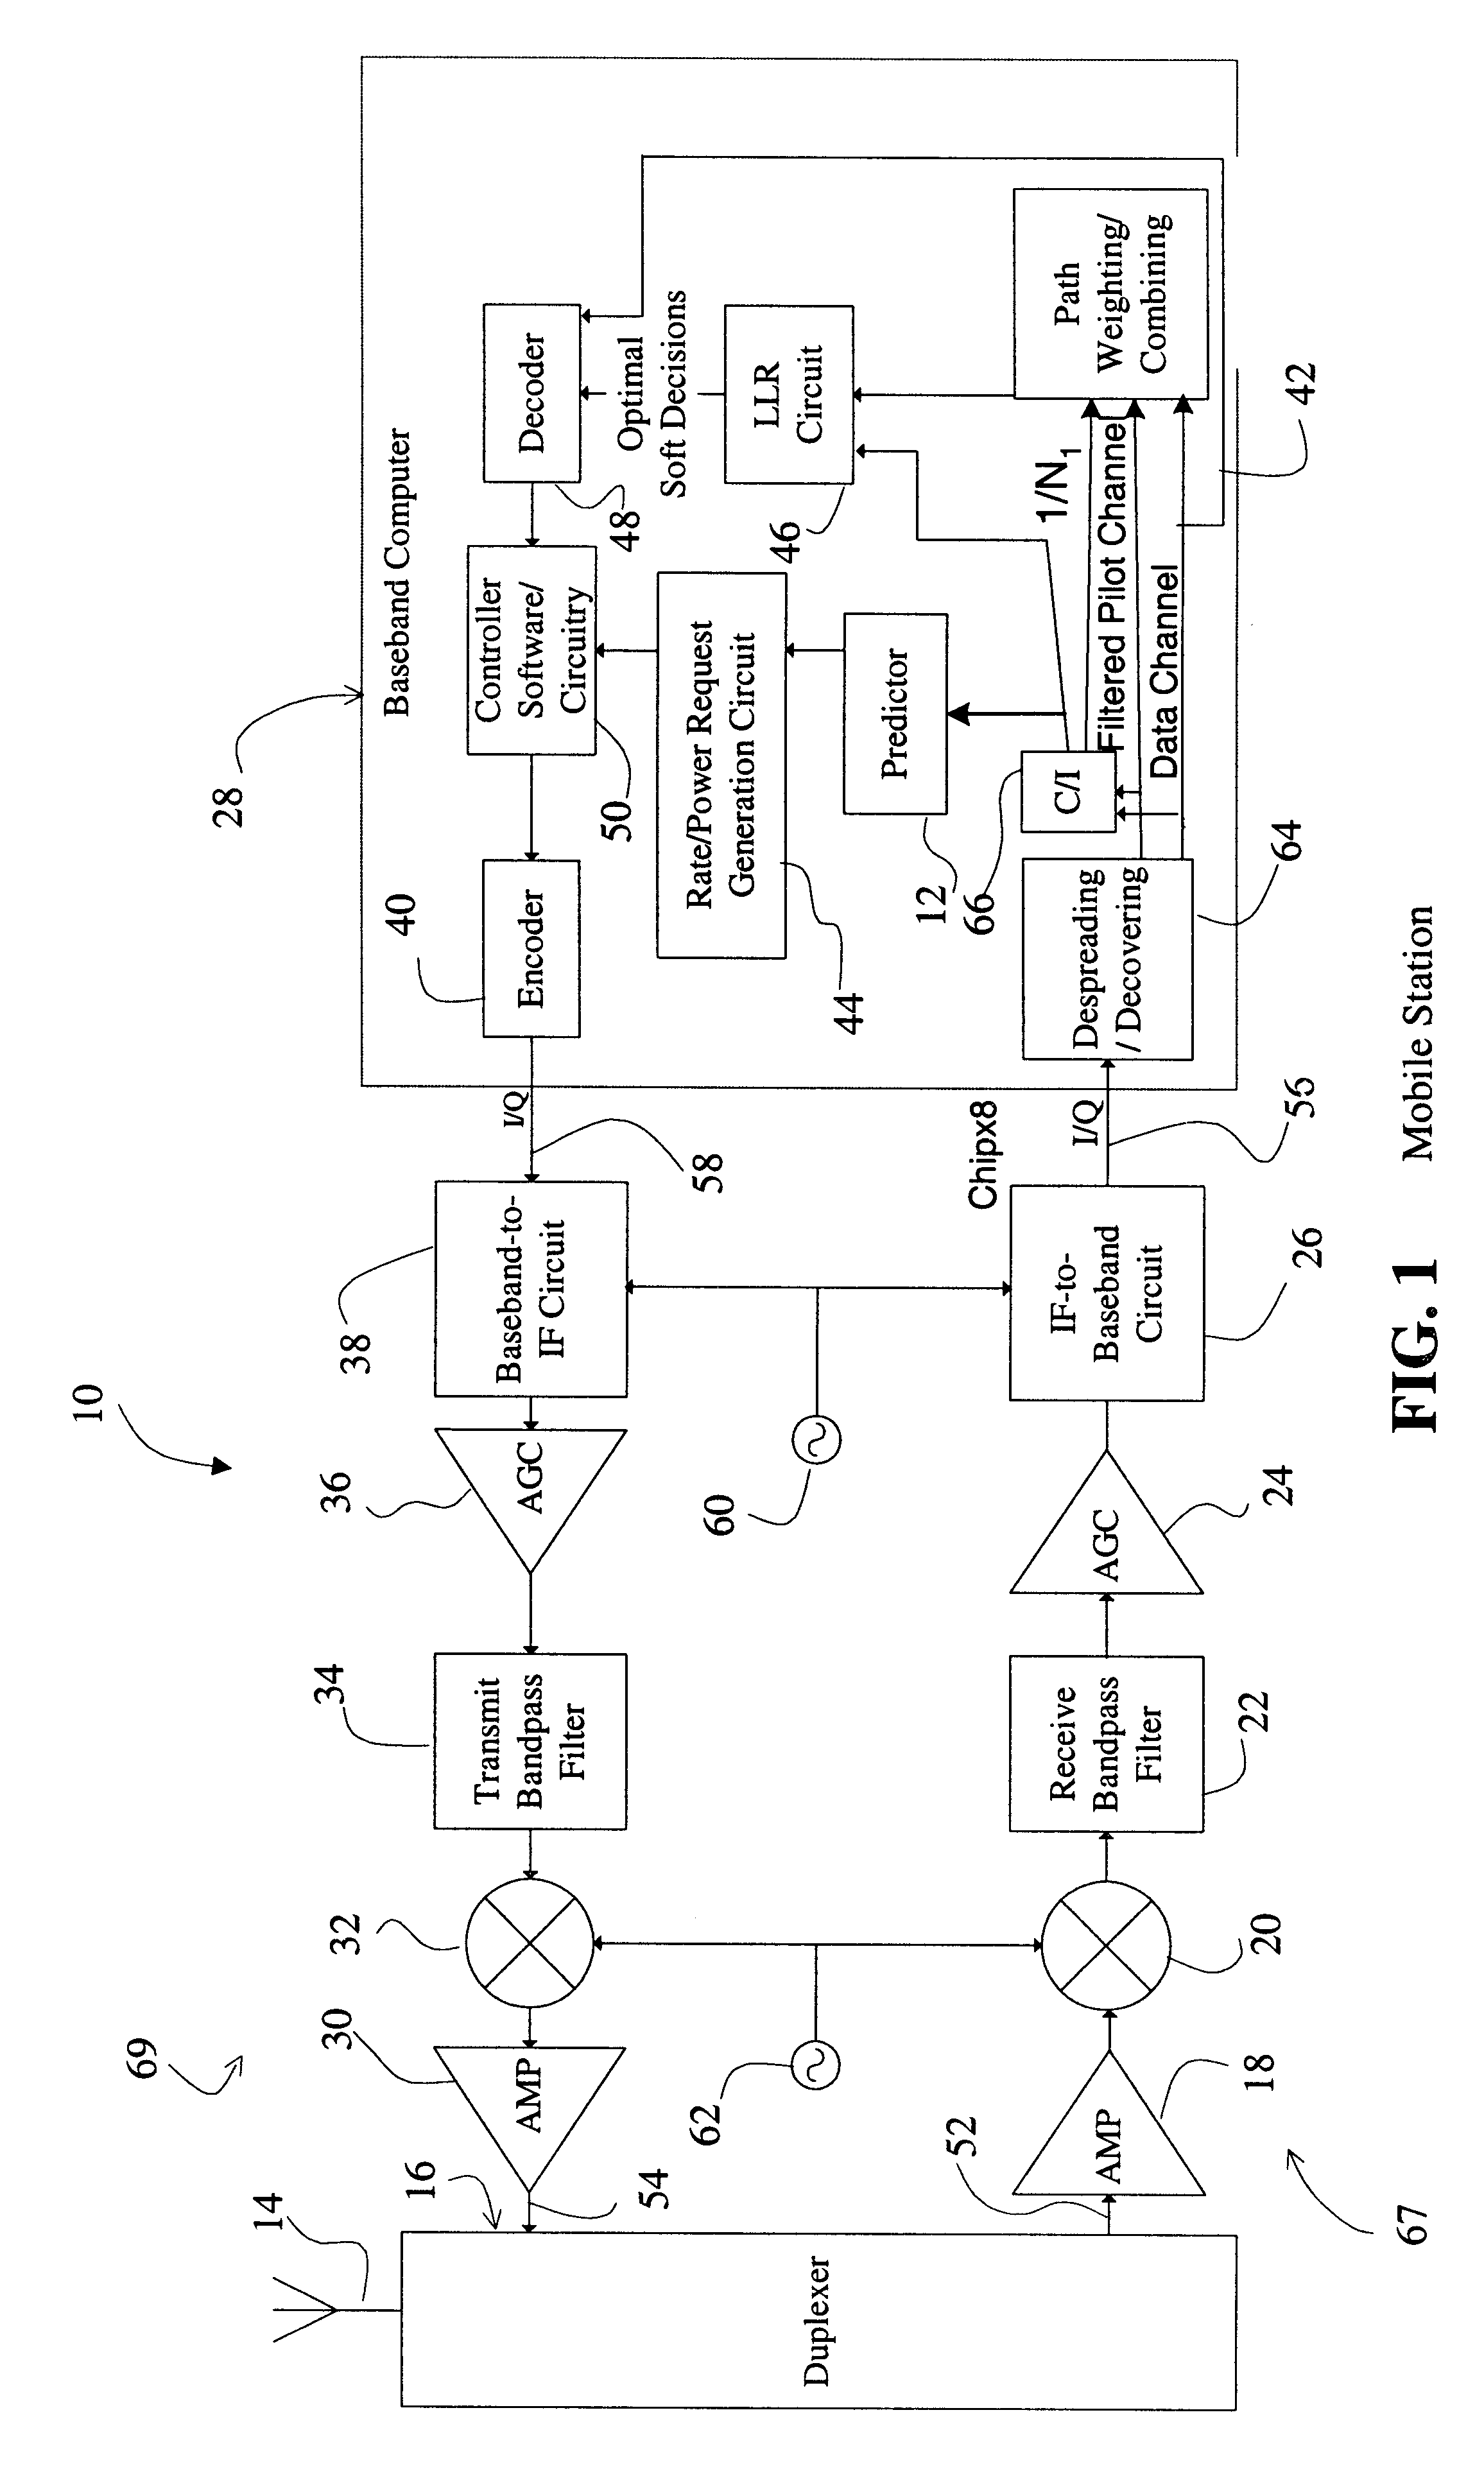 System and method for accurately predicting signal to interference and noise ratio to improve communications system performance